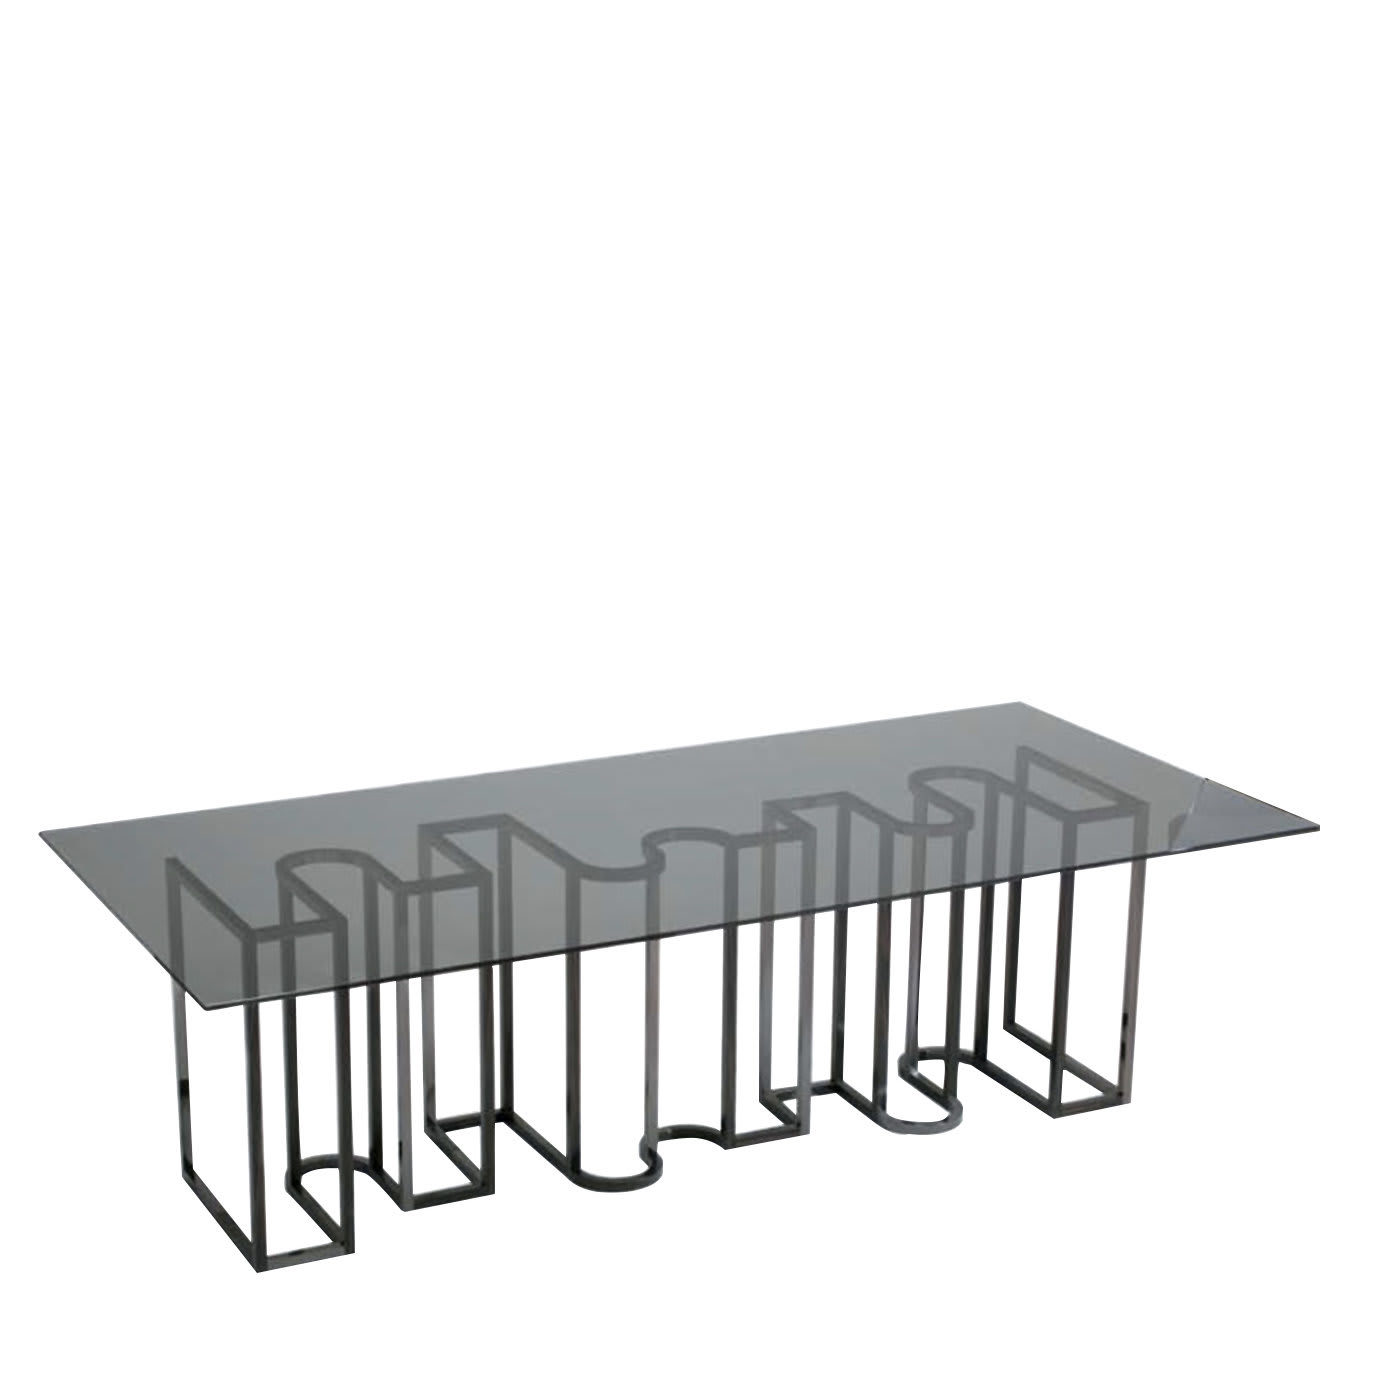 K-Dining Table - Orsi